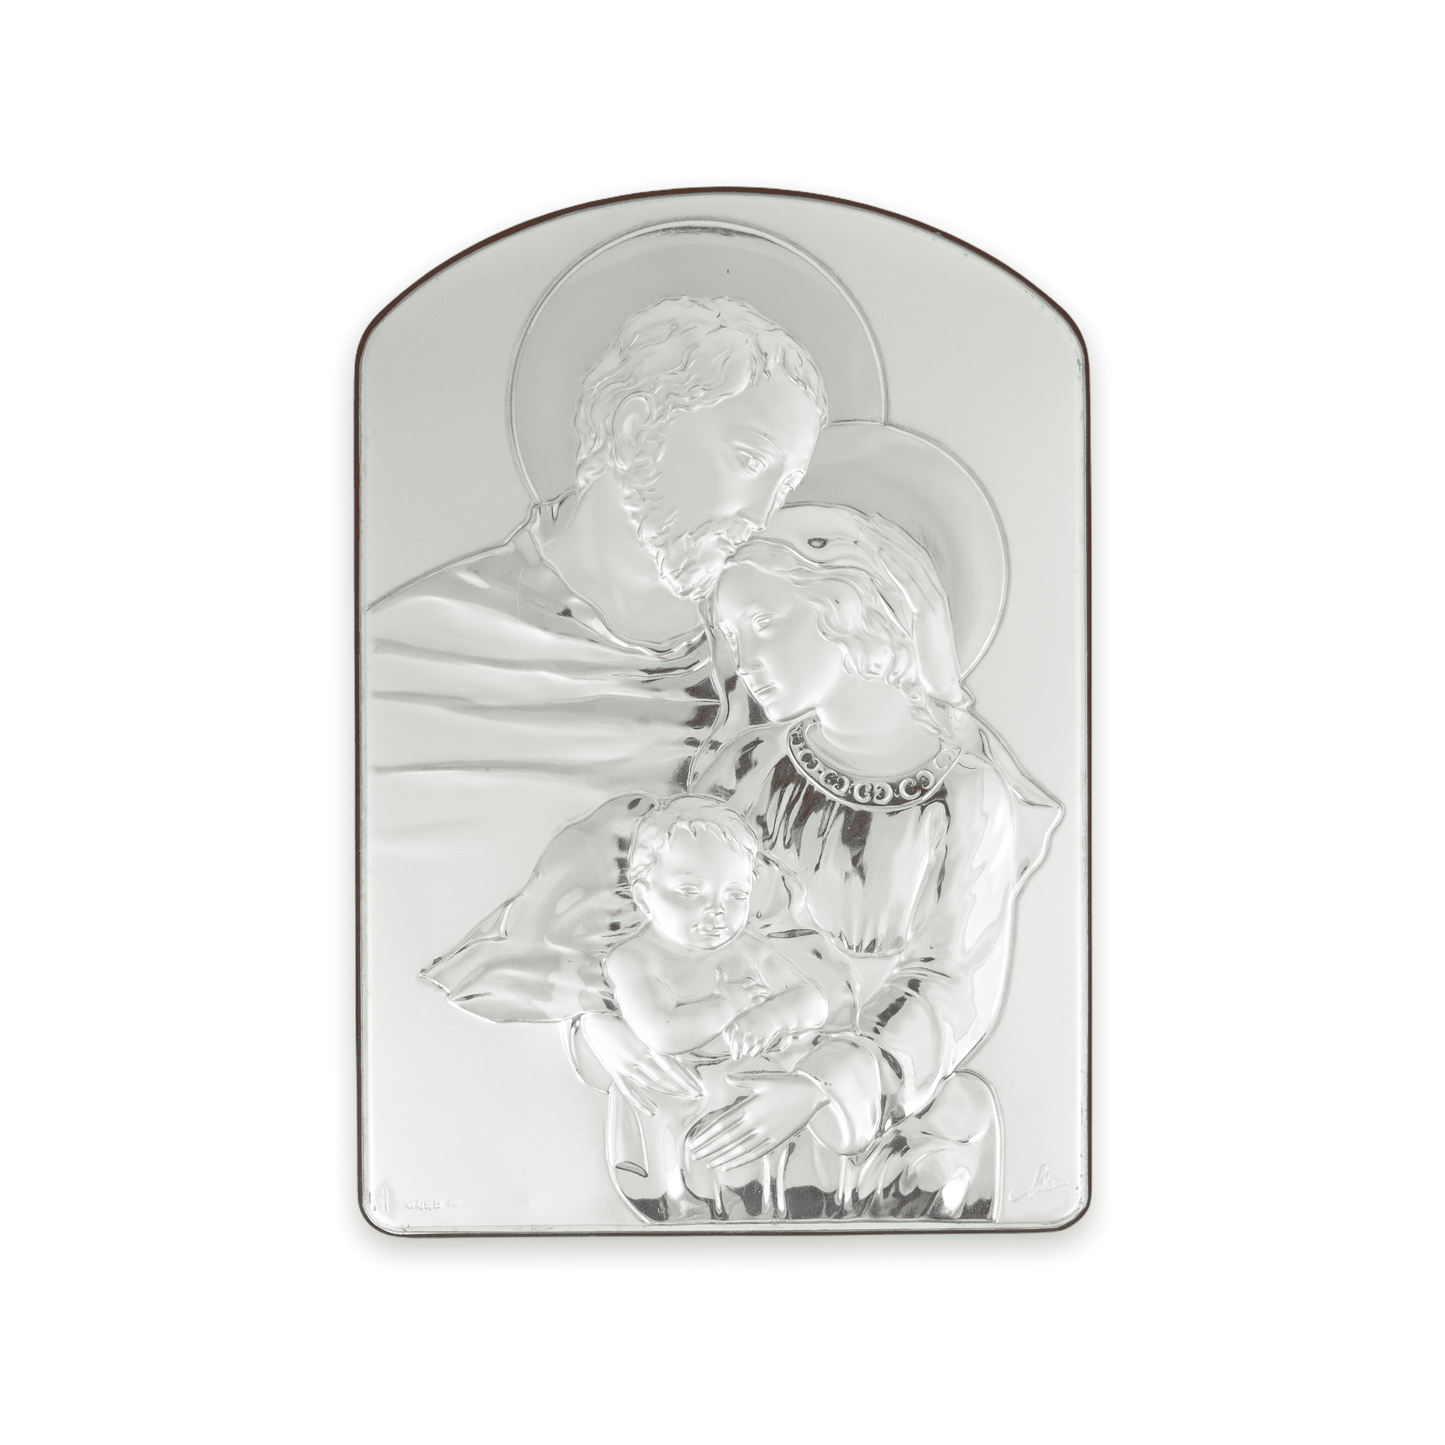 MONDO CATTOLICO 12X8 cm Holy Family Painting Sterling Silver Bilaminate